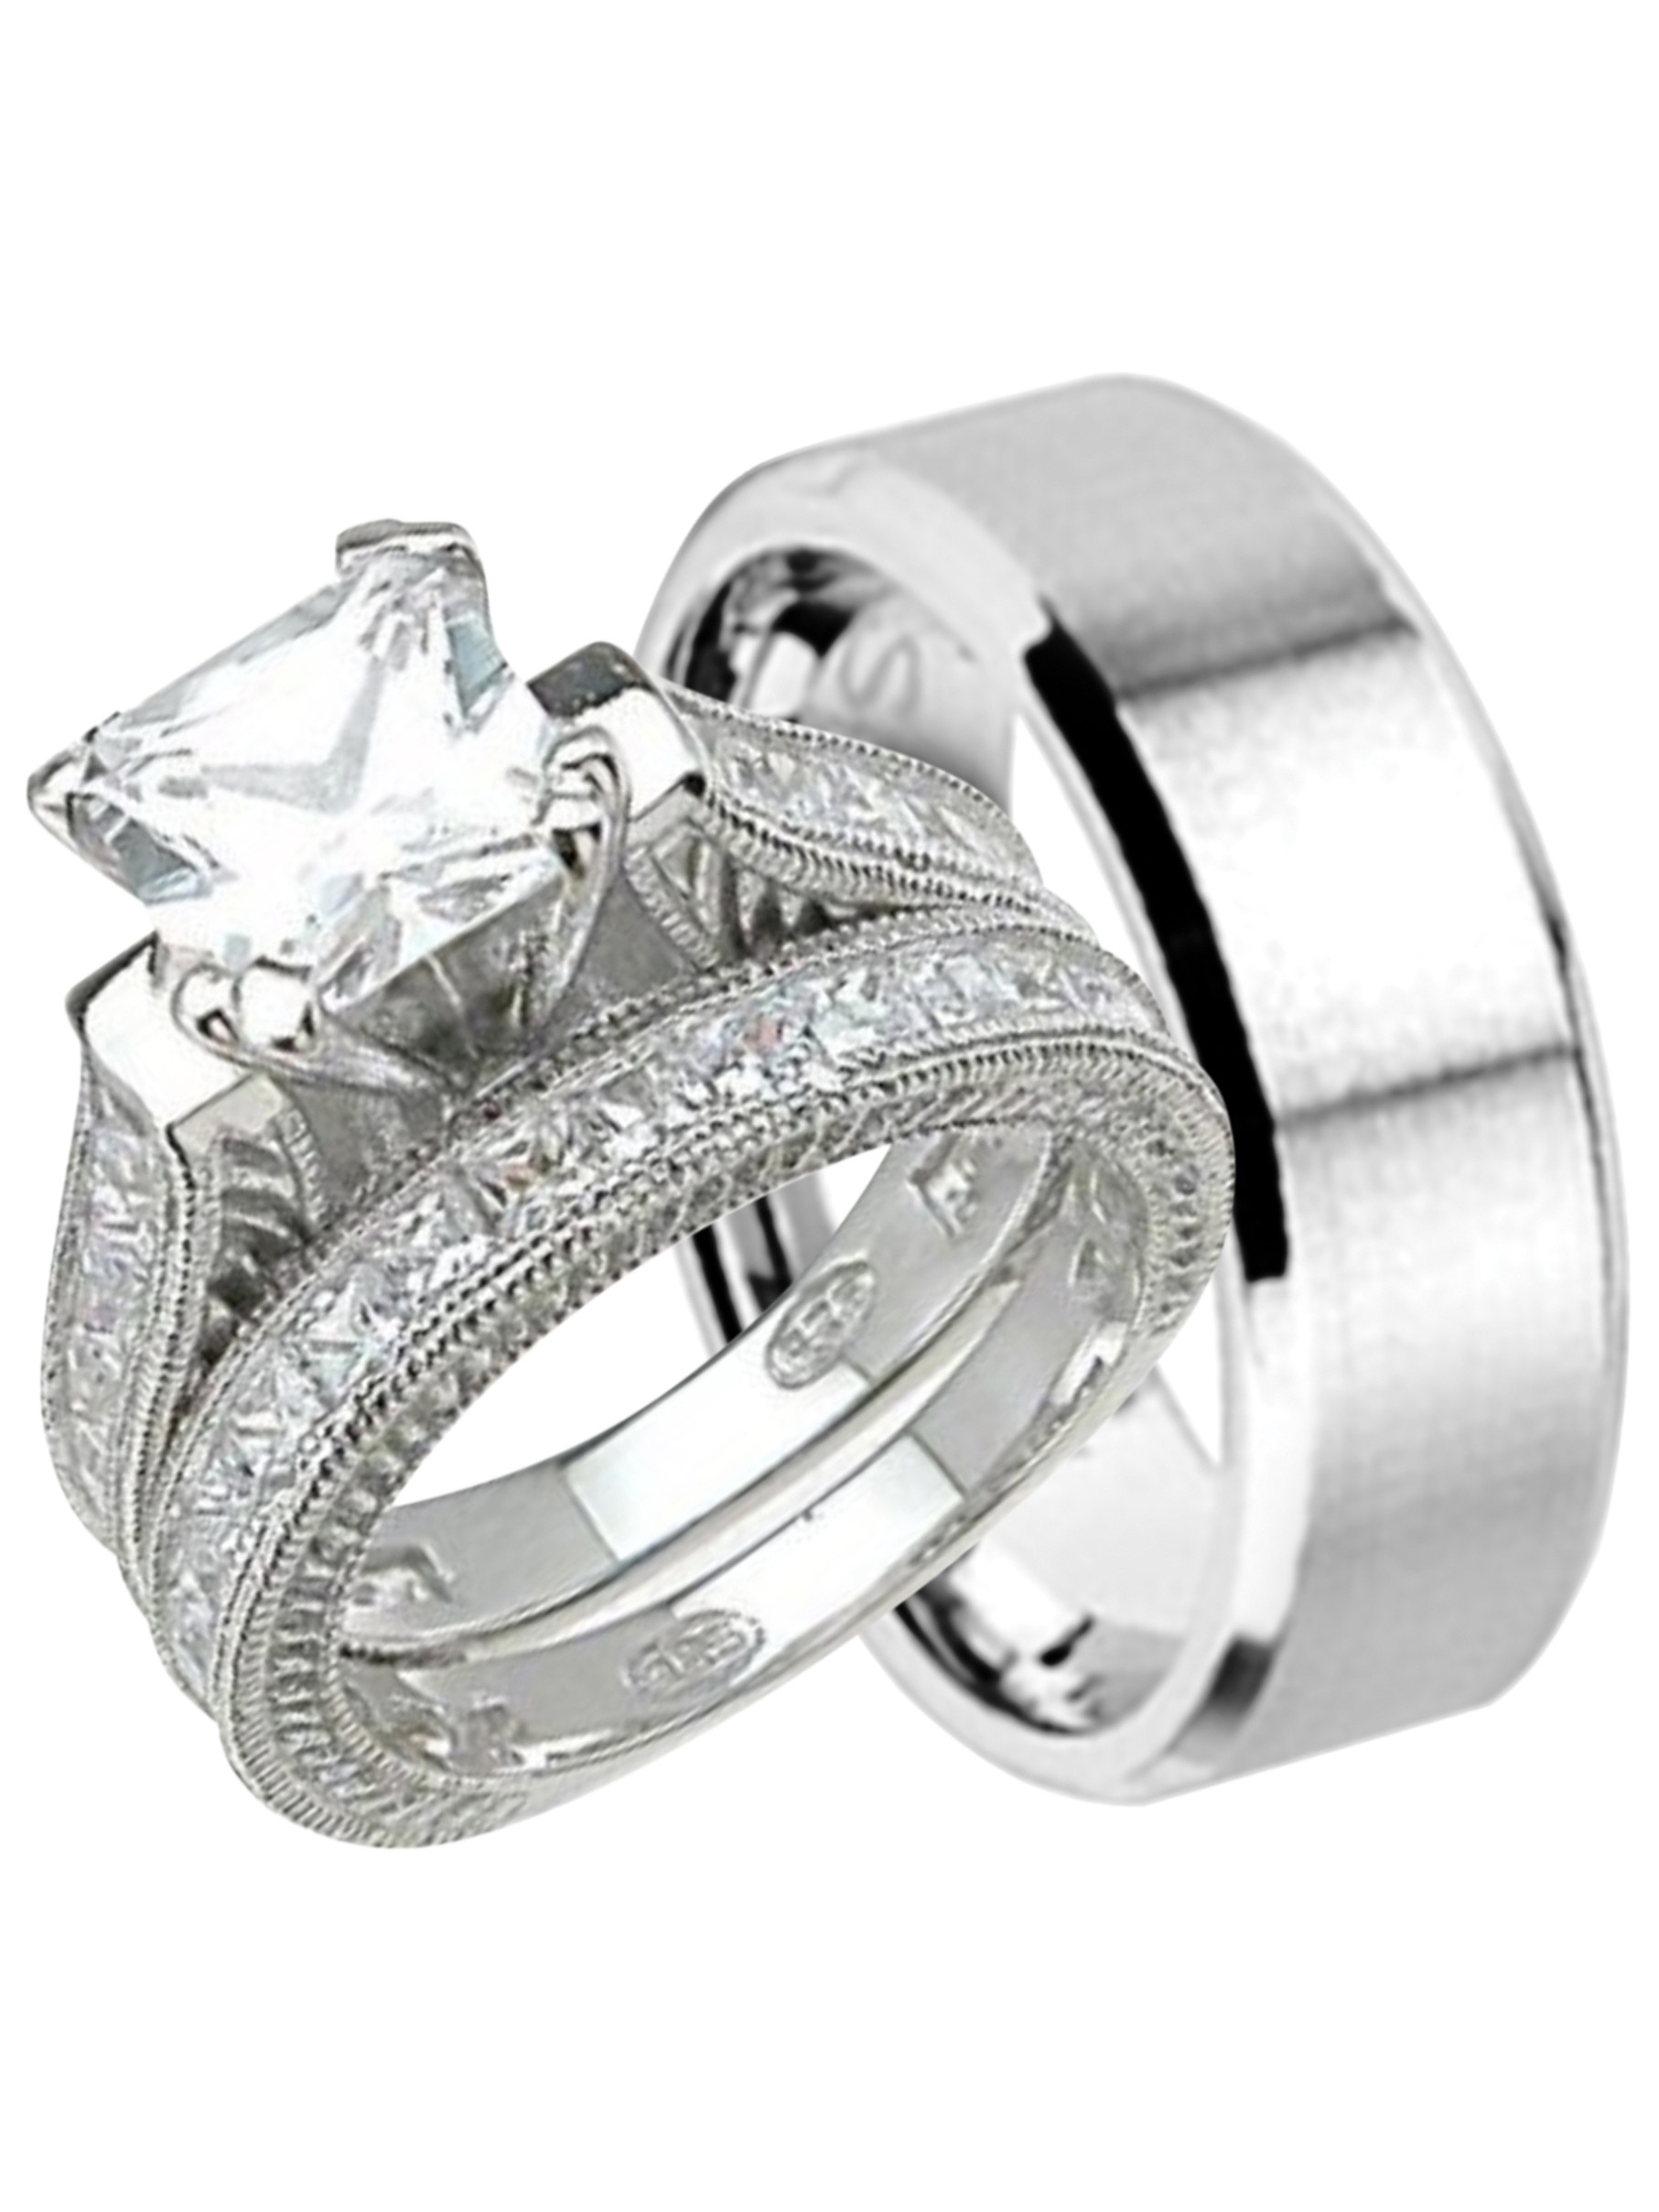 Cheap Wedding Rings For Him And Her
 LaRaso & Co His and Hers Wedding Ring Set Cheap Wedding